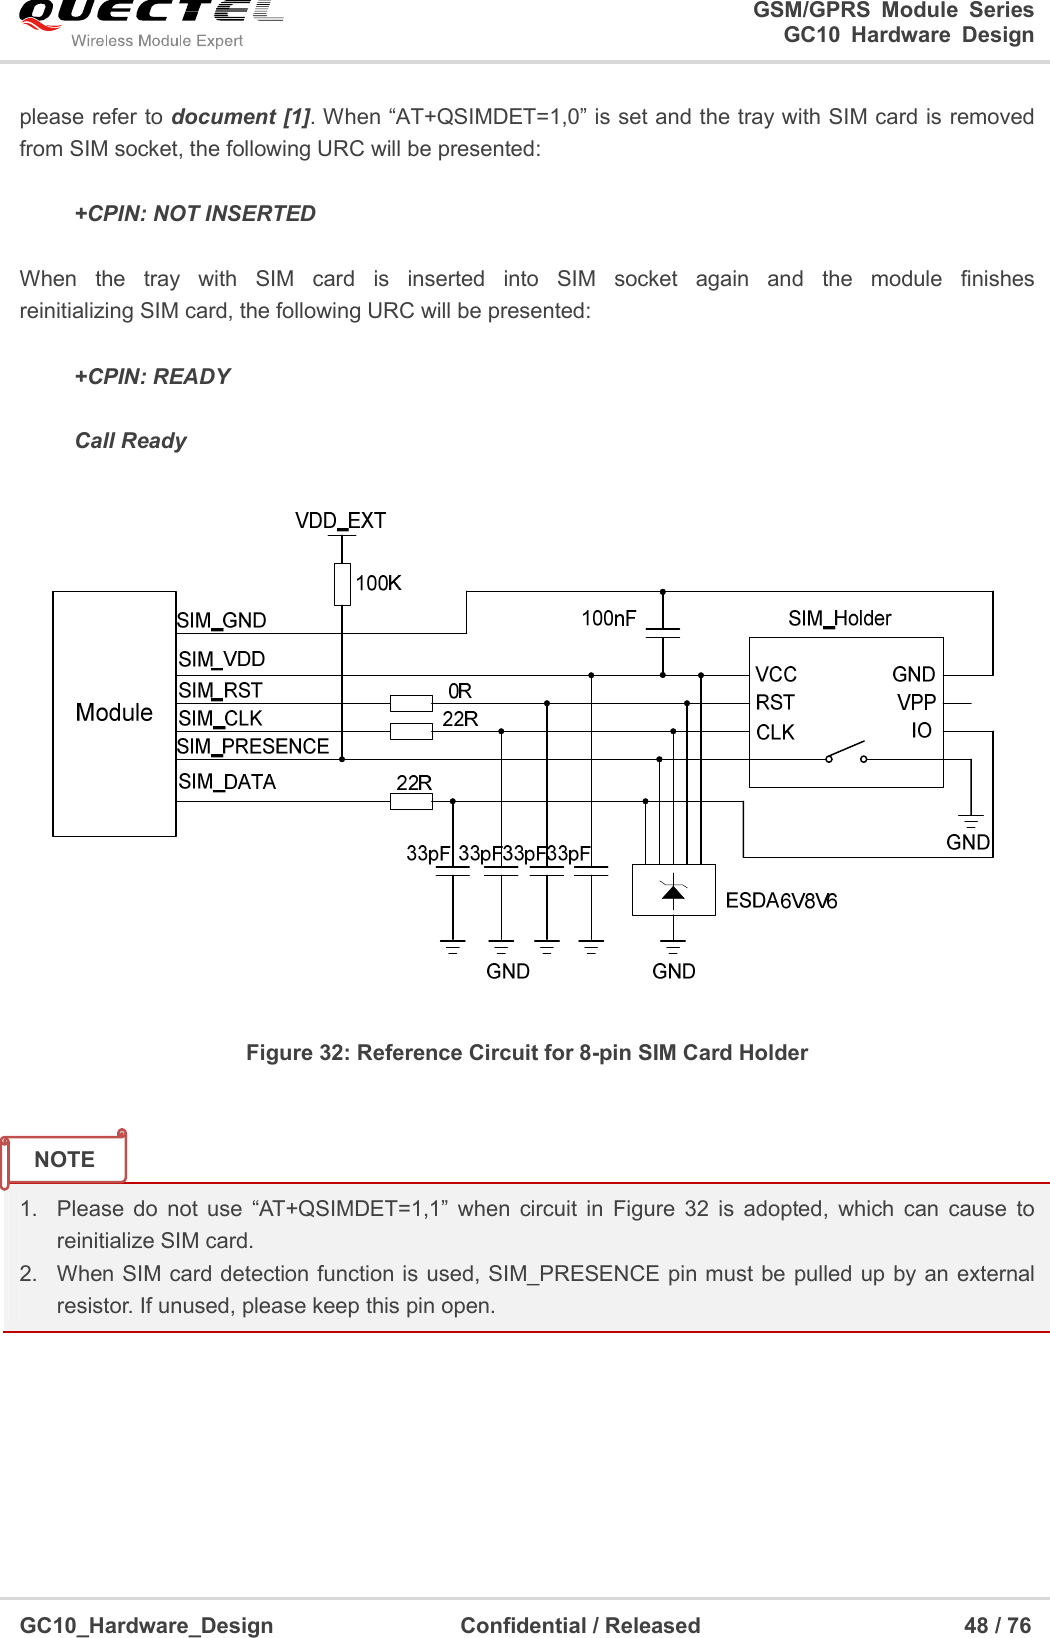                                                                          GSM/GPRS  Module  Series                                                                 GC10 Hardware Design  GC10_Hardware_Design                                  Confidential / Released                                                48 / 76      please refer to document [1]. When “AT+QSIMDET=1,0” is set and the tray with SIM card is removed from SIM socket, the following URC will be presented:       +CPIN: NOT INSERTED  When  the  tray  with  SIM  card  is  inserted  into  SIM  socket  again  and  the  module  finishes               reinitializing SIM card, the following URC will be presented:  +CPIN: READY  Call Ready  Figure 32: Reference Circuit for 8-pin SIM Card Holder   1.  Please  do  not  use  “AT+QSIMDET=1,1”  when  circuit  in  Figure  32  is  adopted,  which  can  cause  to reinitialize SIM card. 2.  When SIM card detection function is used, SIM_PRESENCE pin must be  pulled up by an  external resistor. If unused, please keep this pin open.         NOTE 